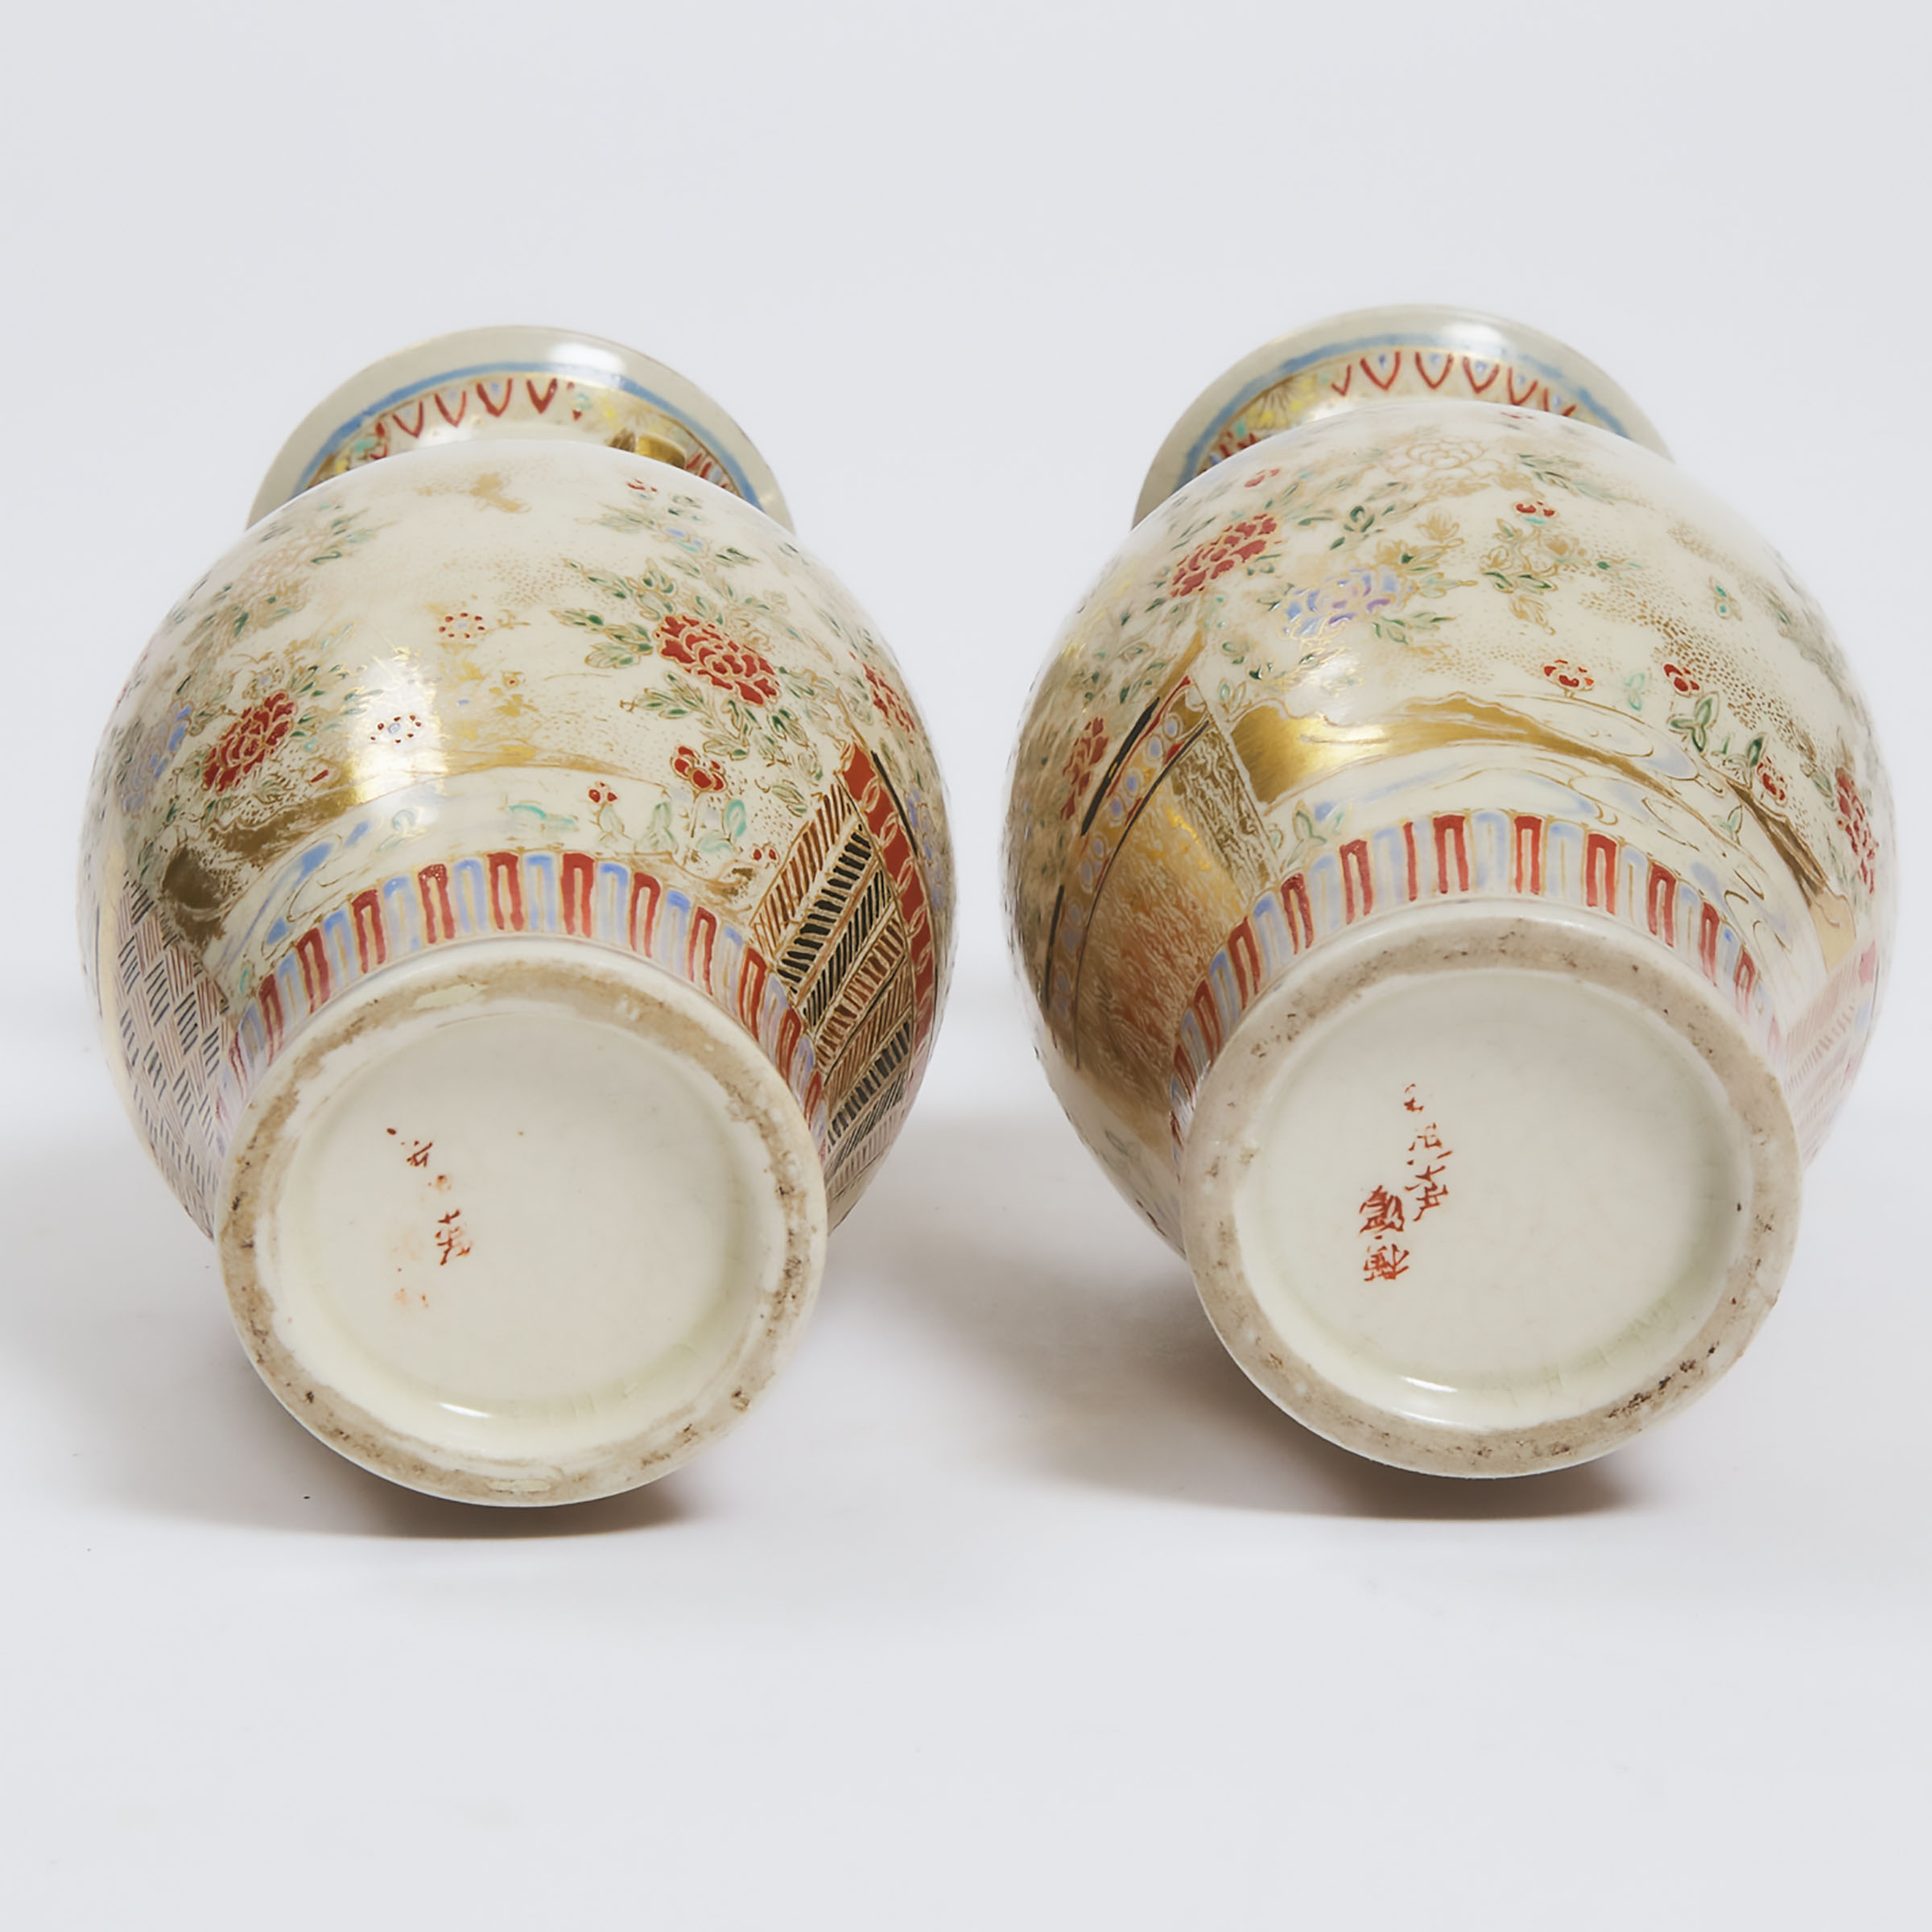 A Pair of Small Satsuma Vases, Meiji Period, height 5.9 in — 15 cm (2 Pieces) - Image 3 of 3